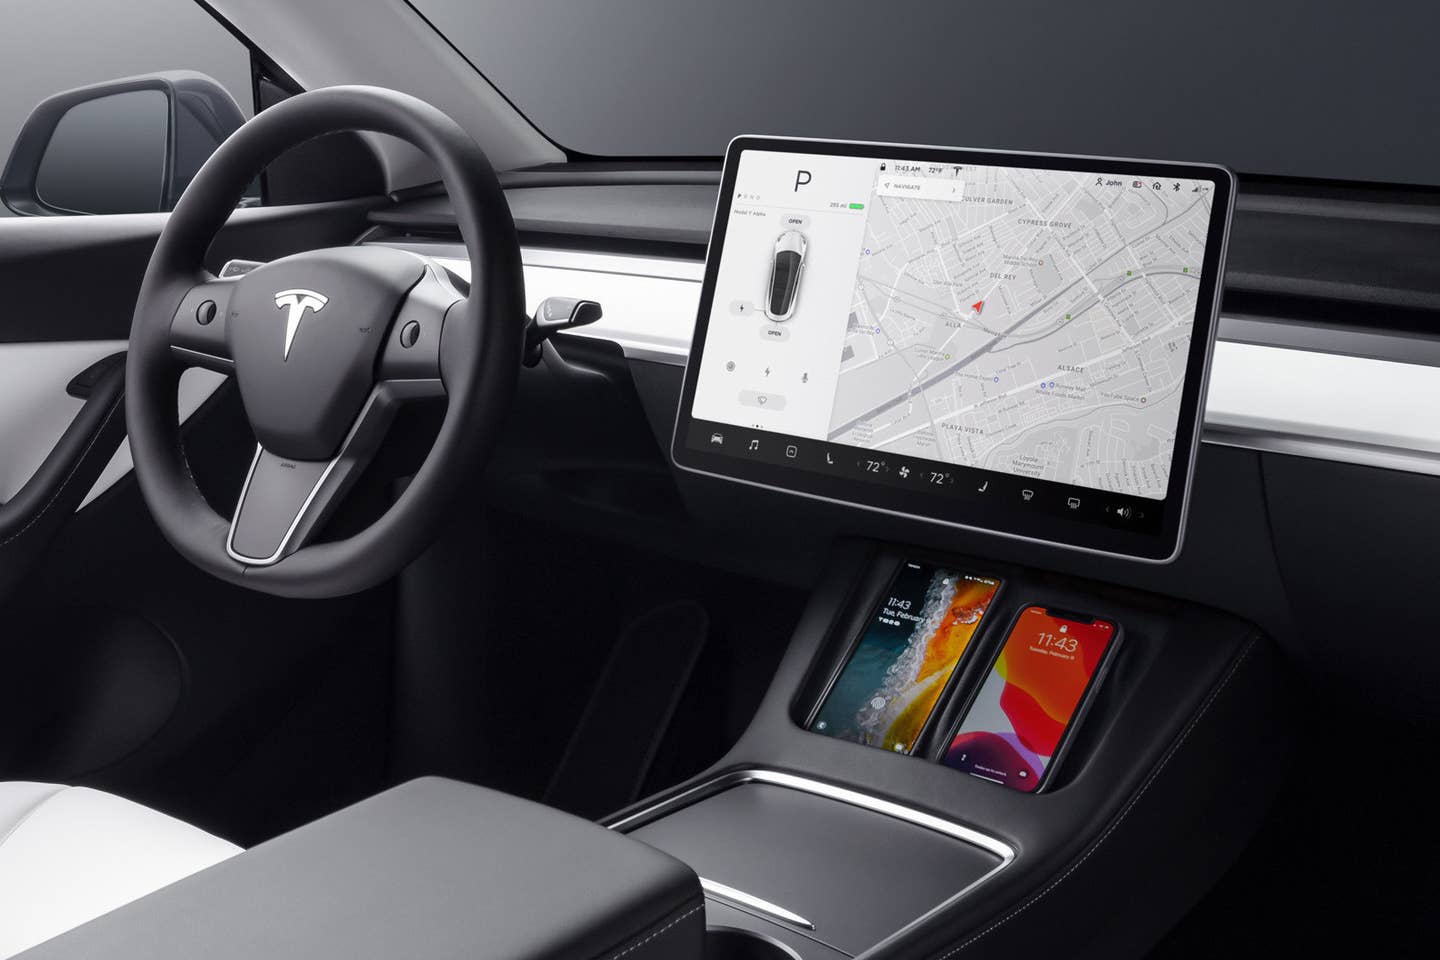 Tesla Model Y cockpit as shipped from the factory, with phones charging in their docks